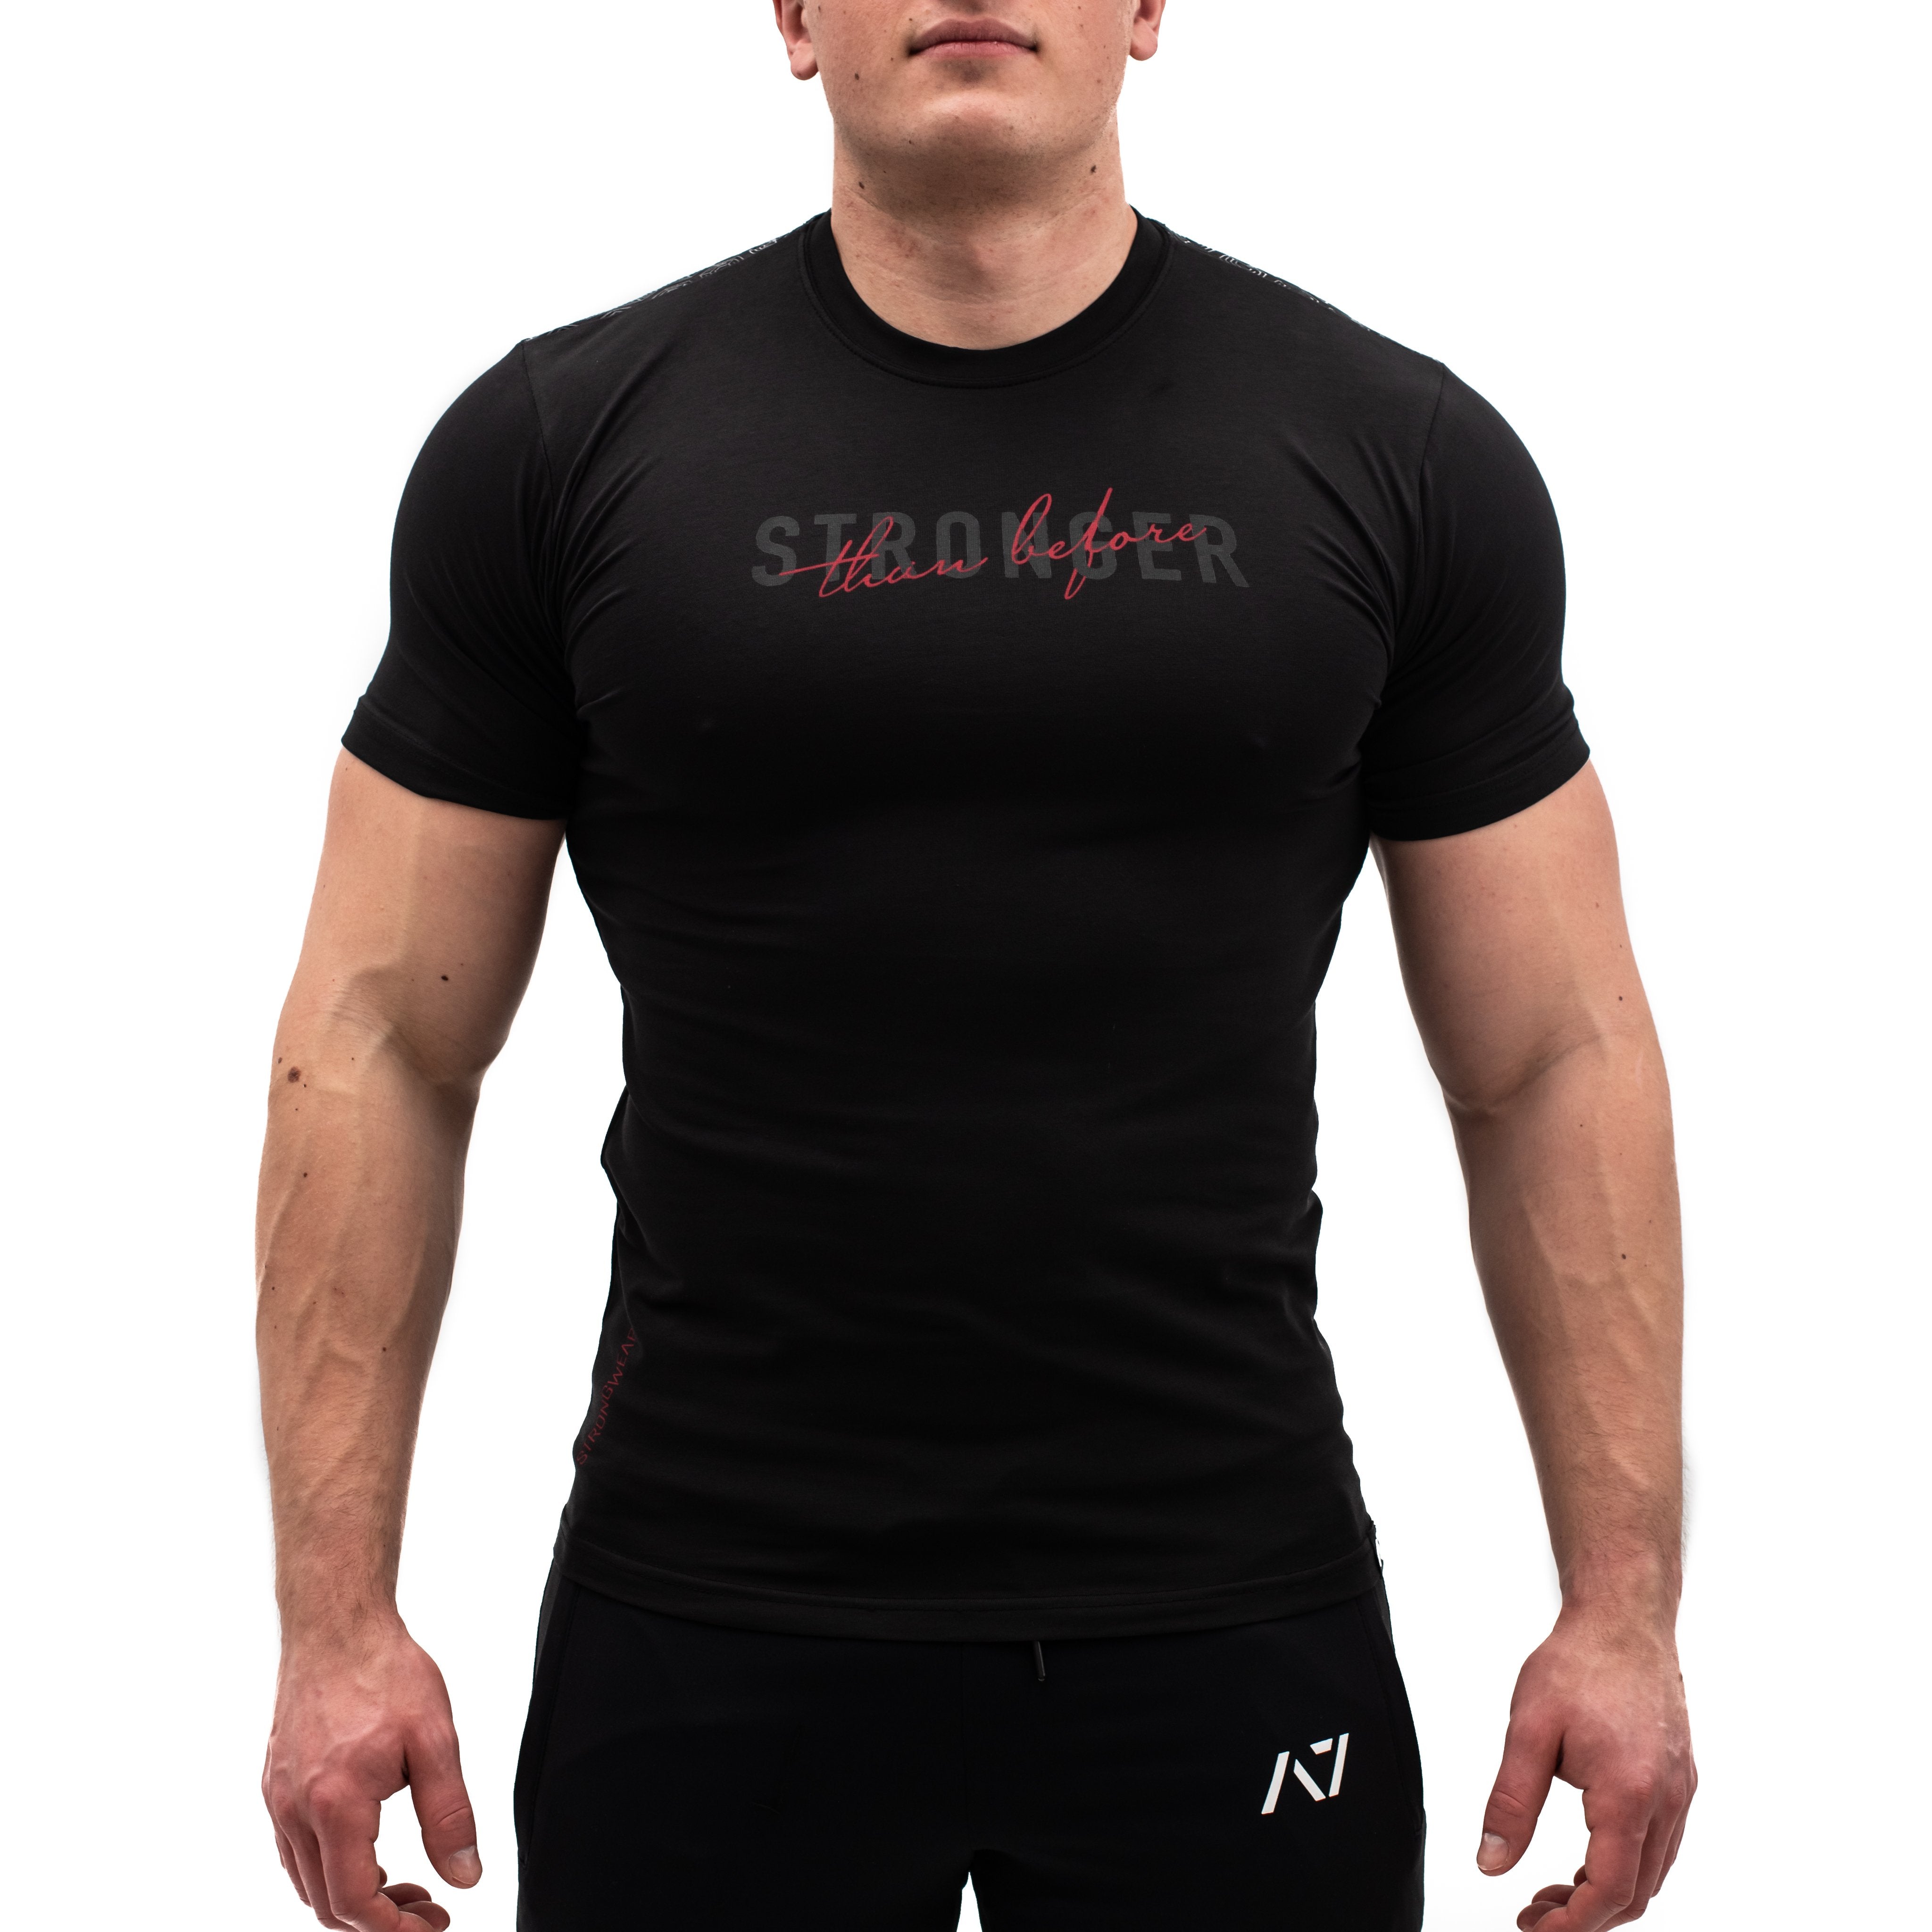 Intertwined Bar Grip T-shirt, great as a squat shirt. Purchase Intertwined Bar Grip tshirt UK from A7 UK. Purchase Intertwined Bar Grip Shirt in Europe from A7 UK. No more chalk and no more sliding. Best Bar Grip Tshirts, shipping to UK and Europe from A7 UK. Intertwined is our classic black on black shirt design! The best Powerlifting apparel for all your workouts. Available in UK and Europe including France, Italy, Germany, Sweden and Poland